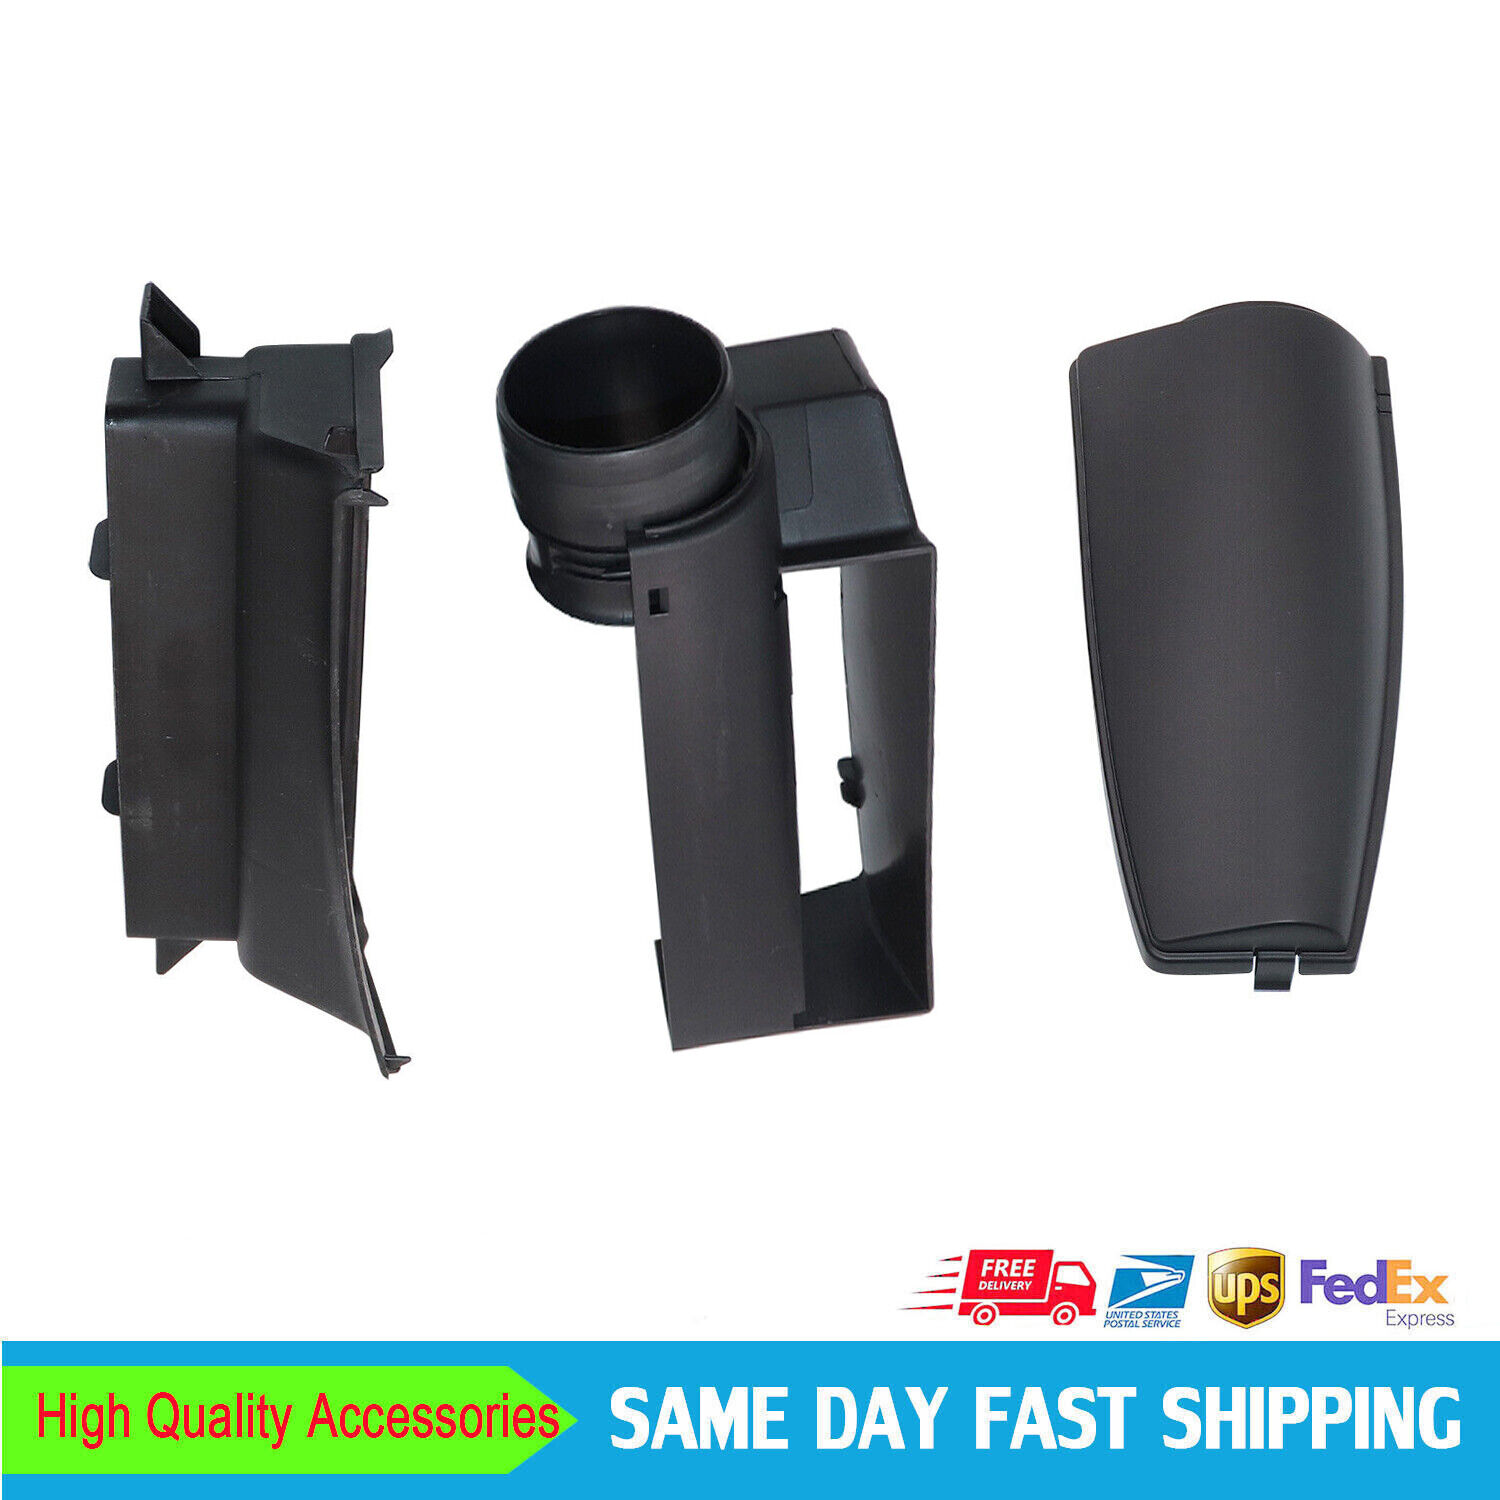 3Pcs Air Intake Guide Inlet Duct Cover For VW Golf Jetta Mk5 Mk6 Audi A3